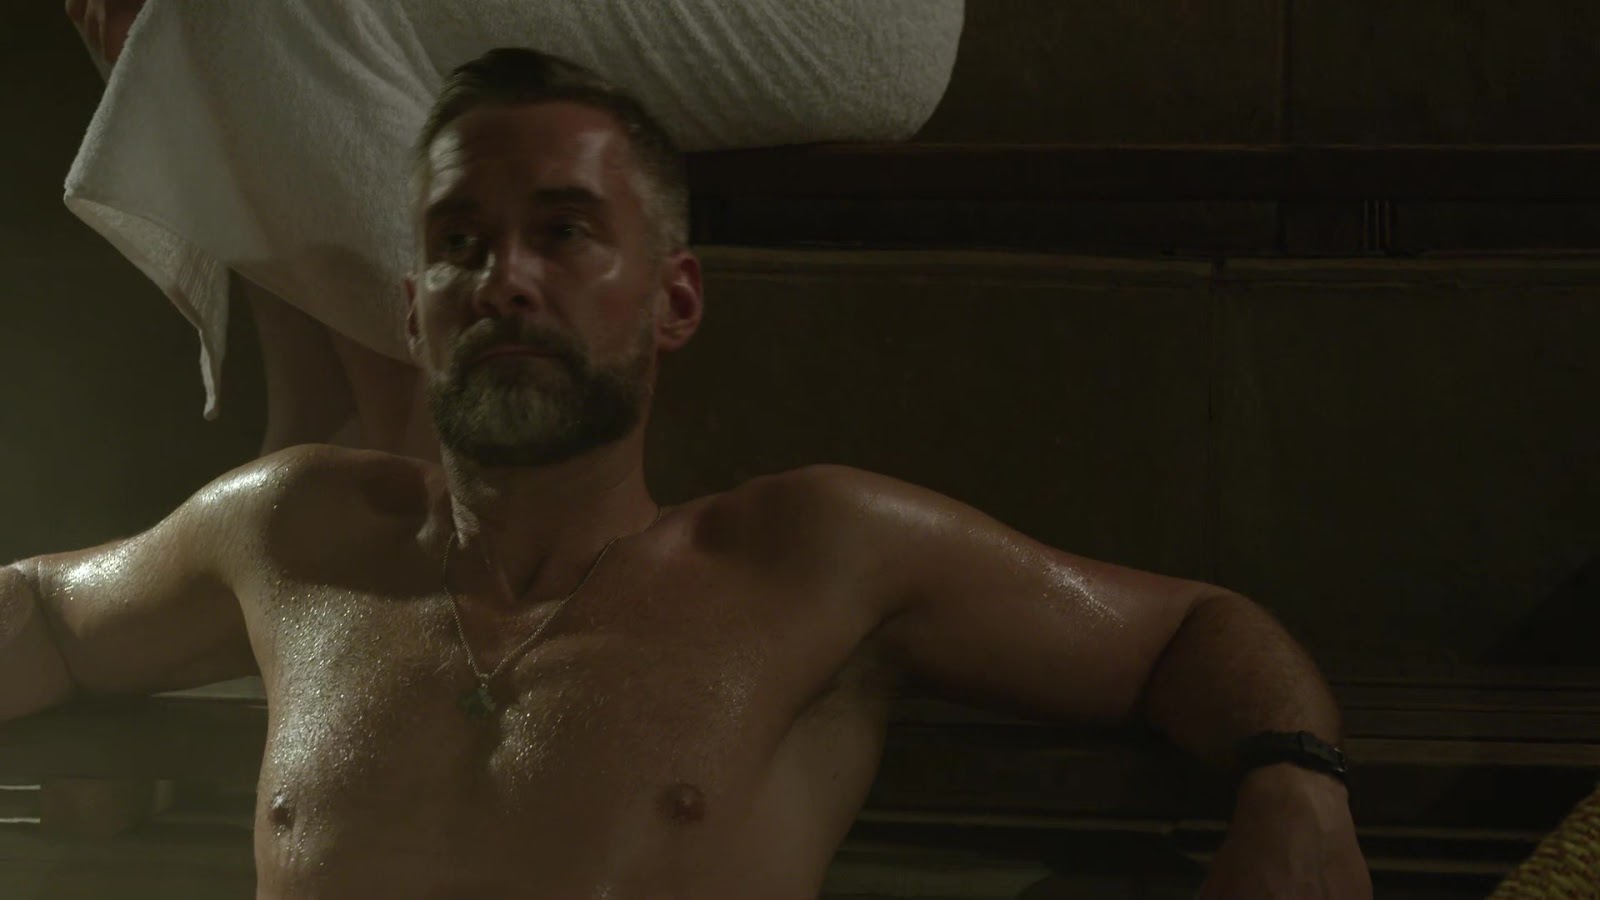 Jay Harrington shirtless in S.W.A.T. 1-19 "Source" .